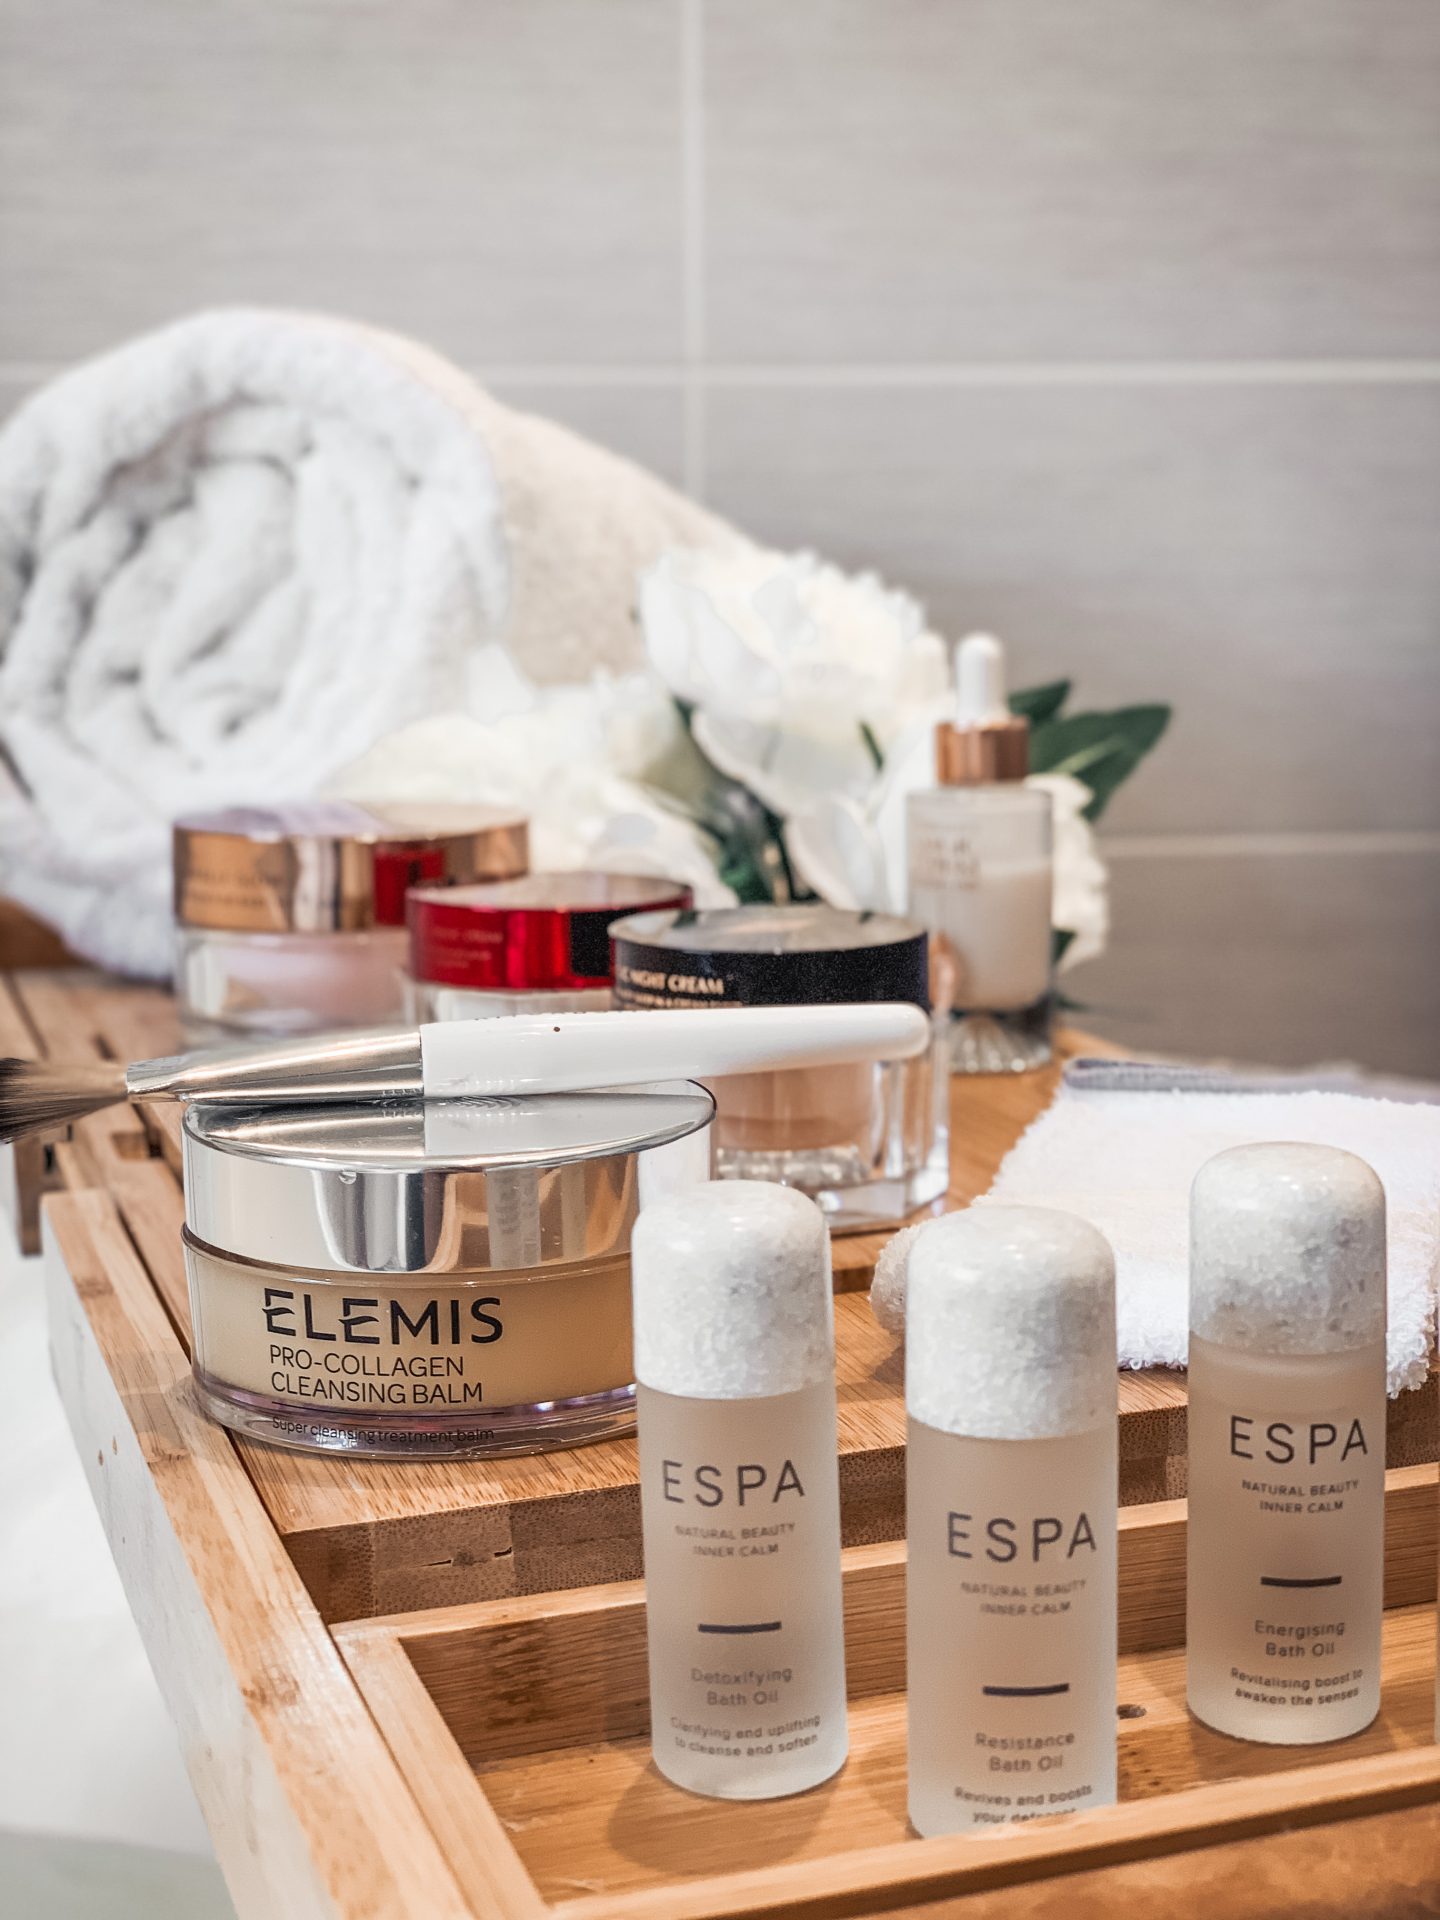 SPA AT HOME | ELEMIS PRODUCTS, CHARLOTTE TILBURY PRODUCTS